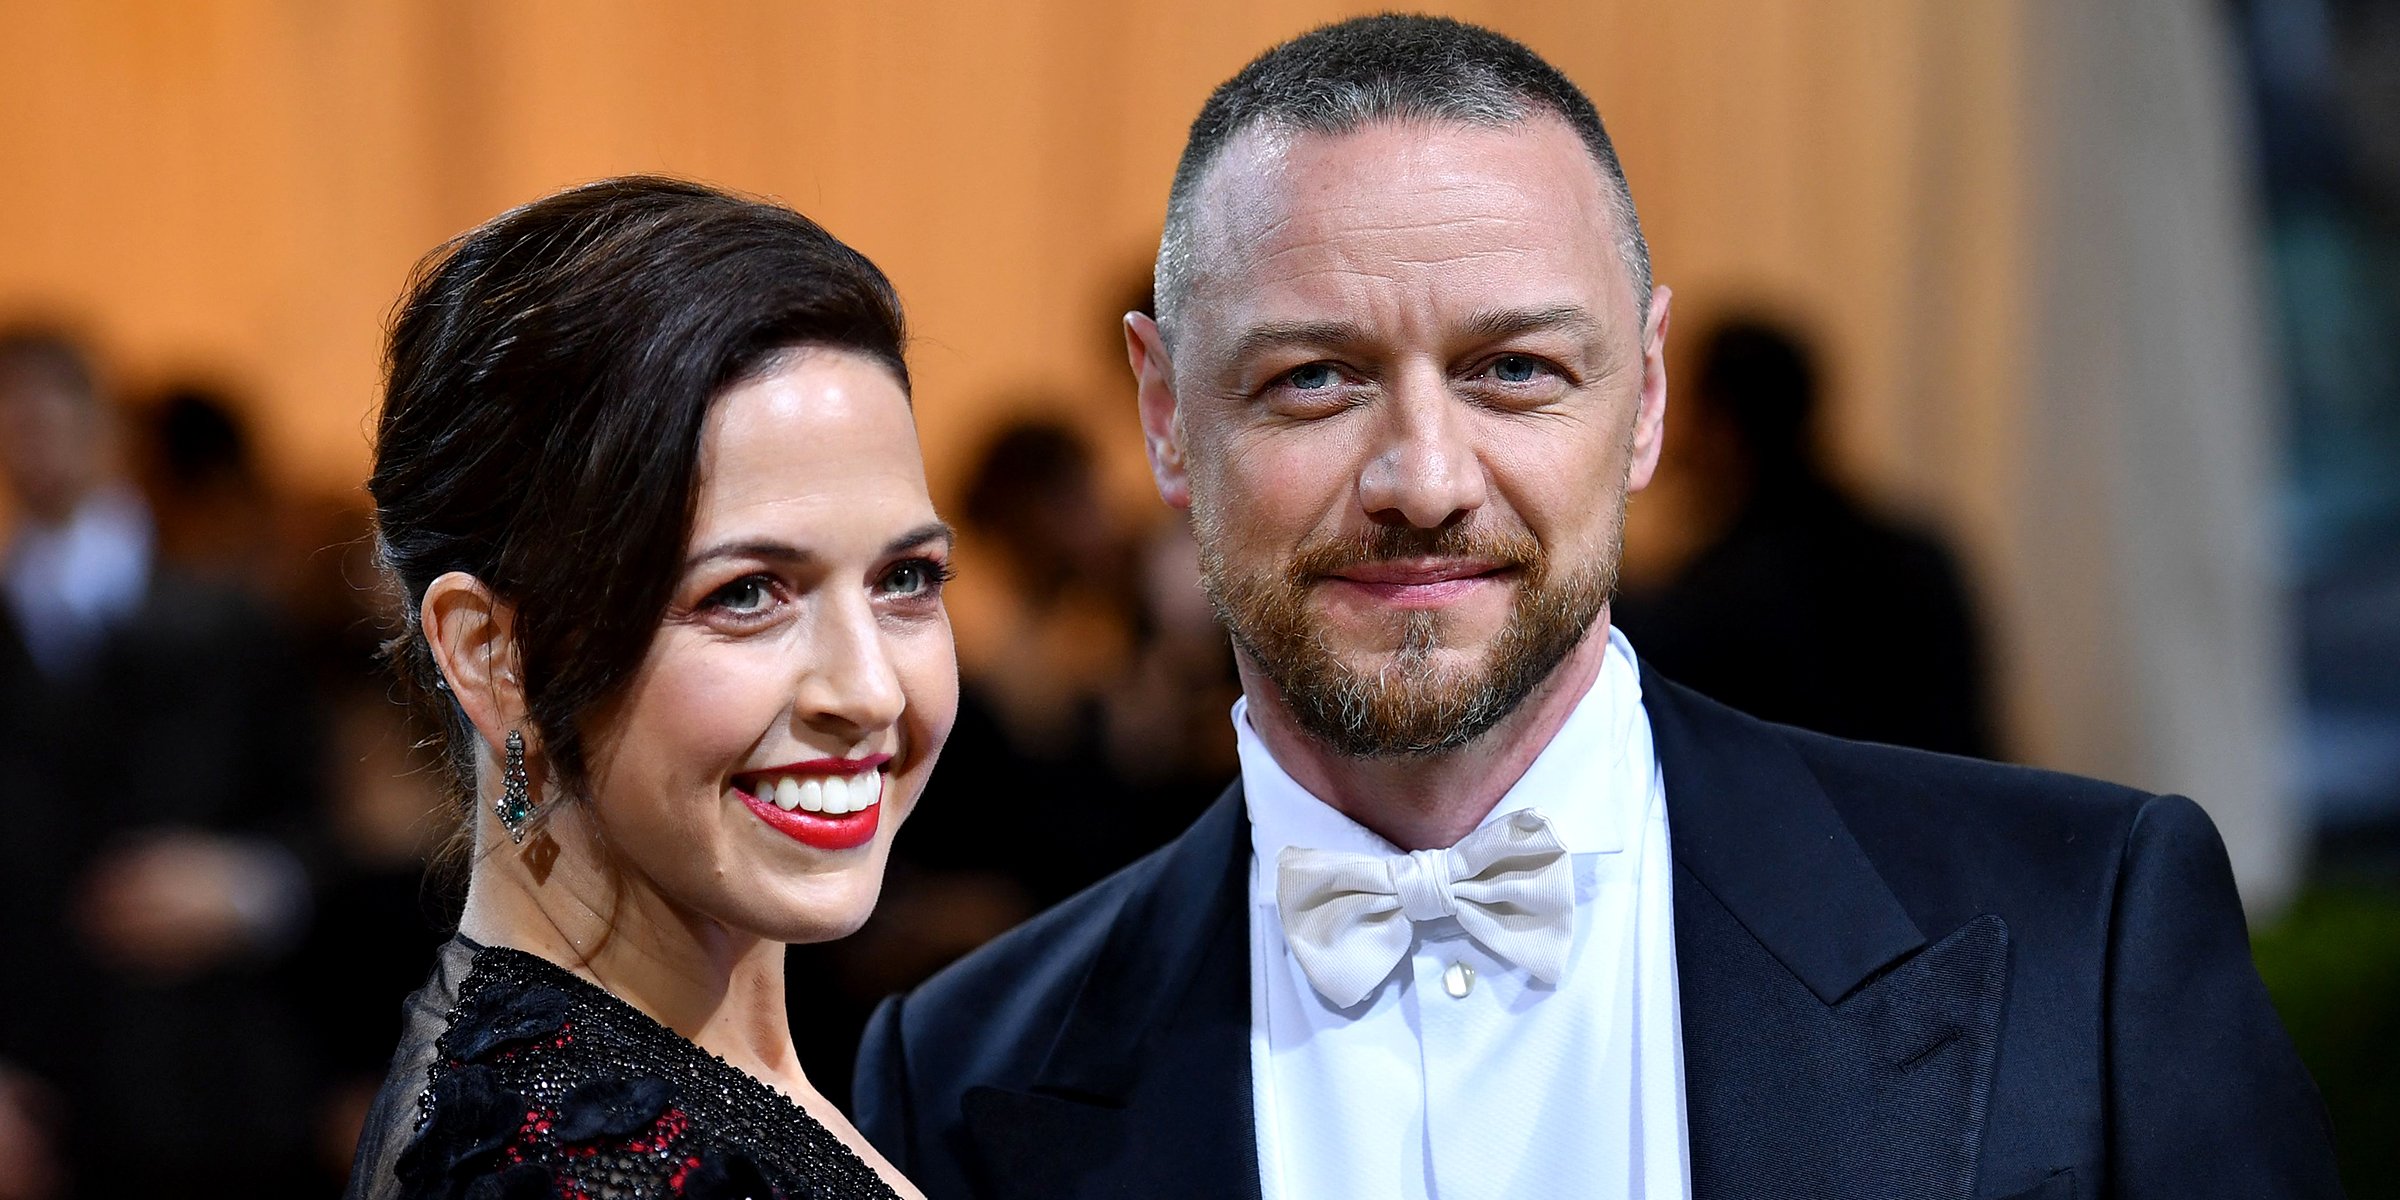 Lisa Liberati & James McAvoy | Source: Getty Images